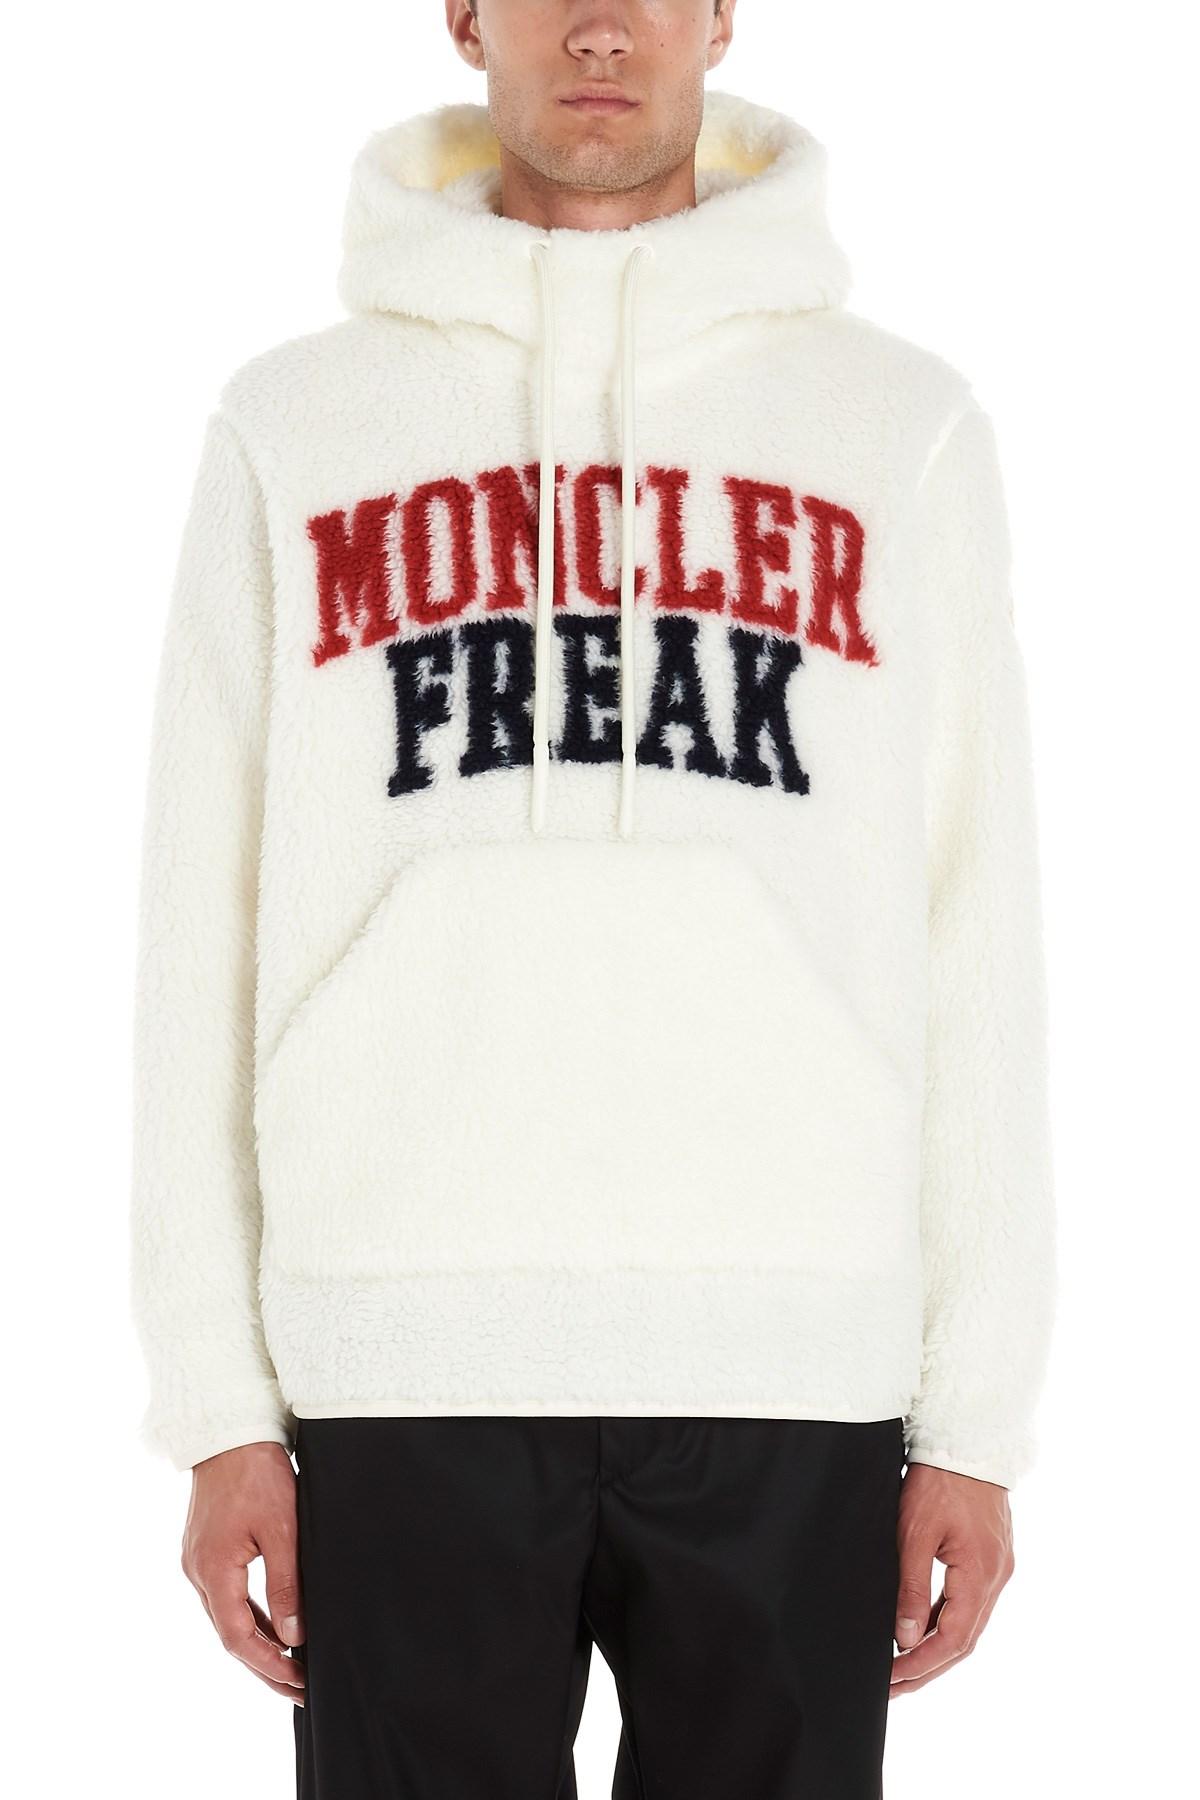 Moncler Genius Synthetic 1952 Teddy Hoodie in White for Men - Lyst